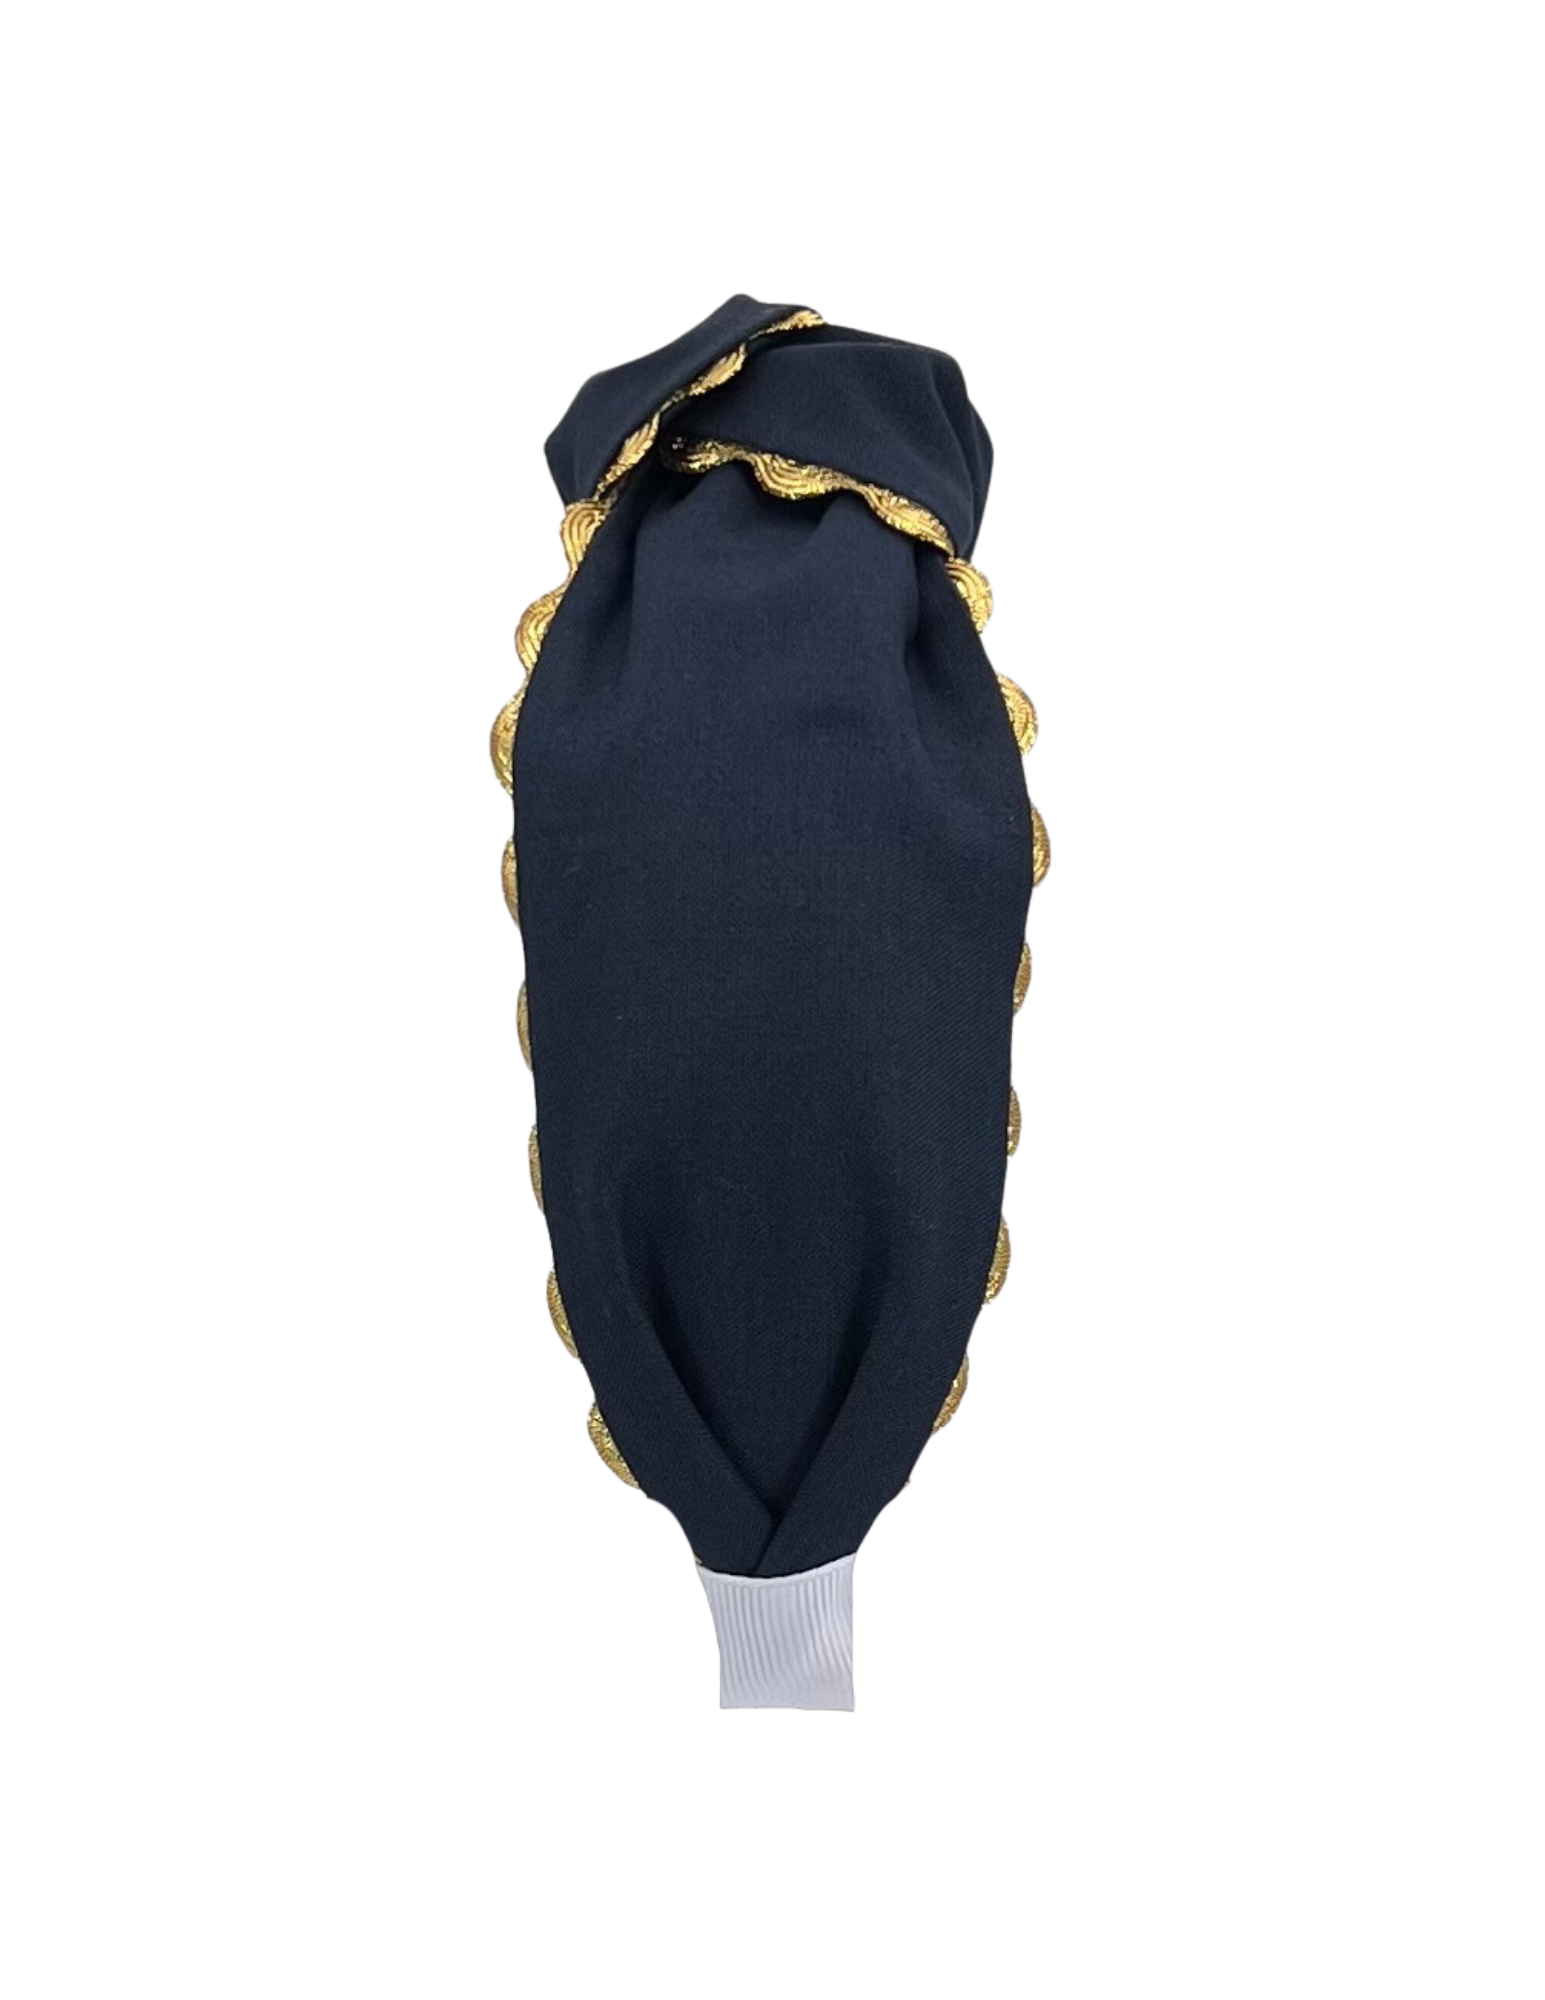 Gold Scallop on Navy